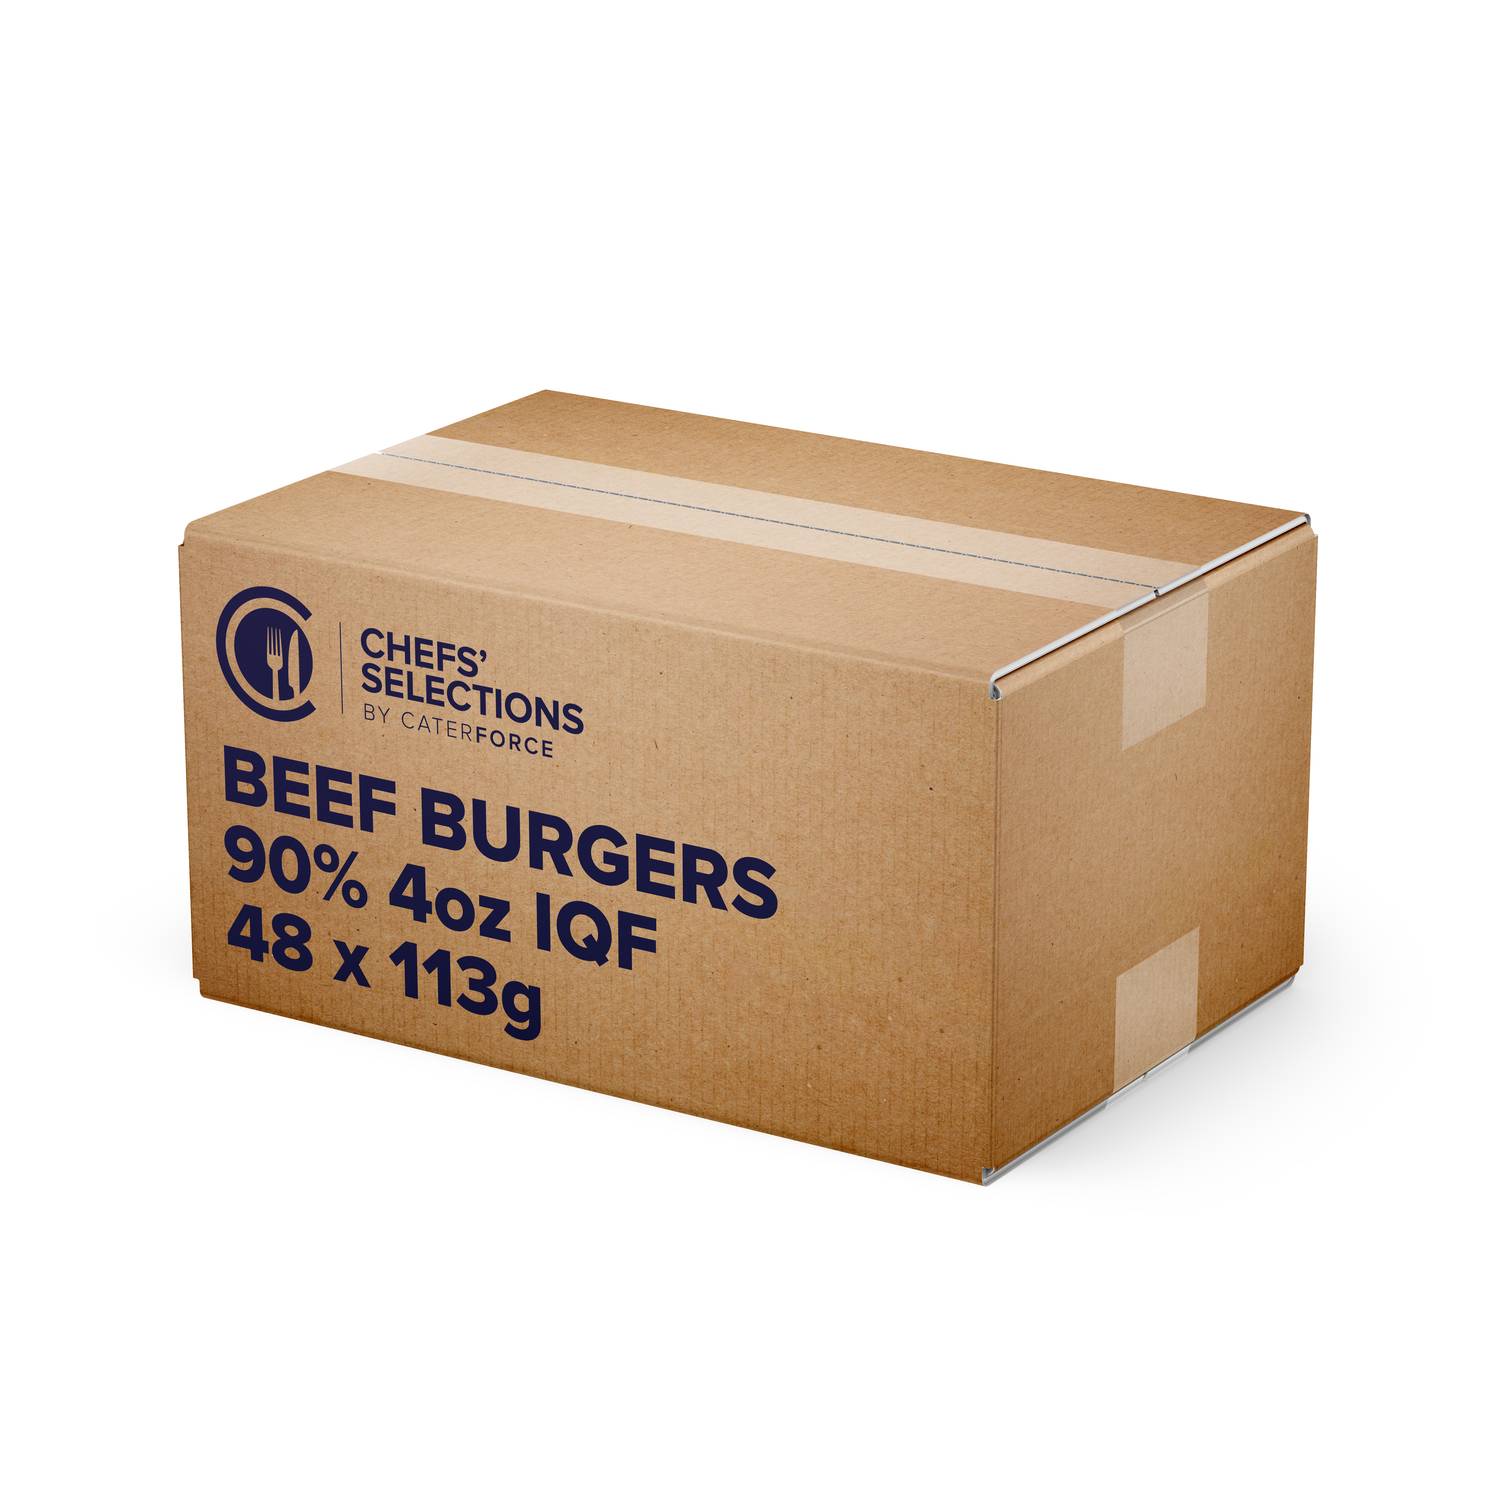 Chefs’ Selections Beef Burger 90% 4oz IQF (48 x 113g)